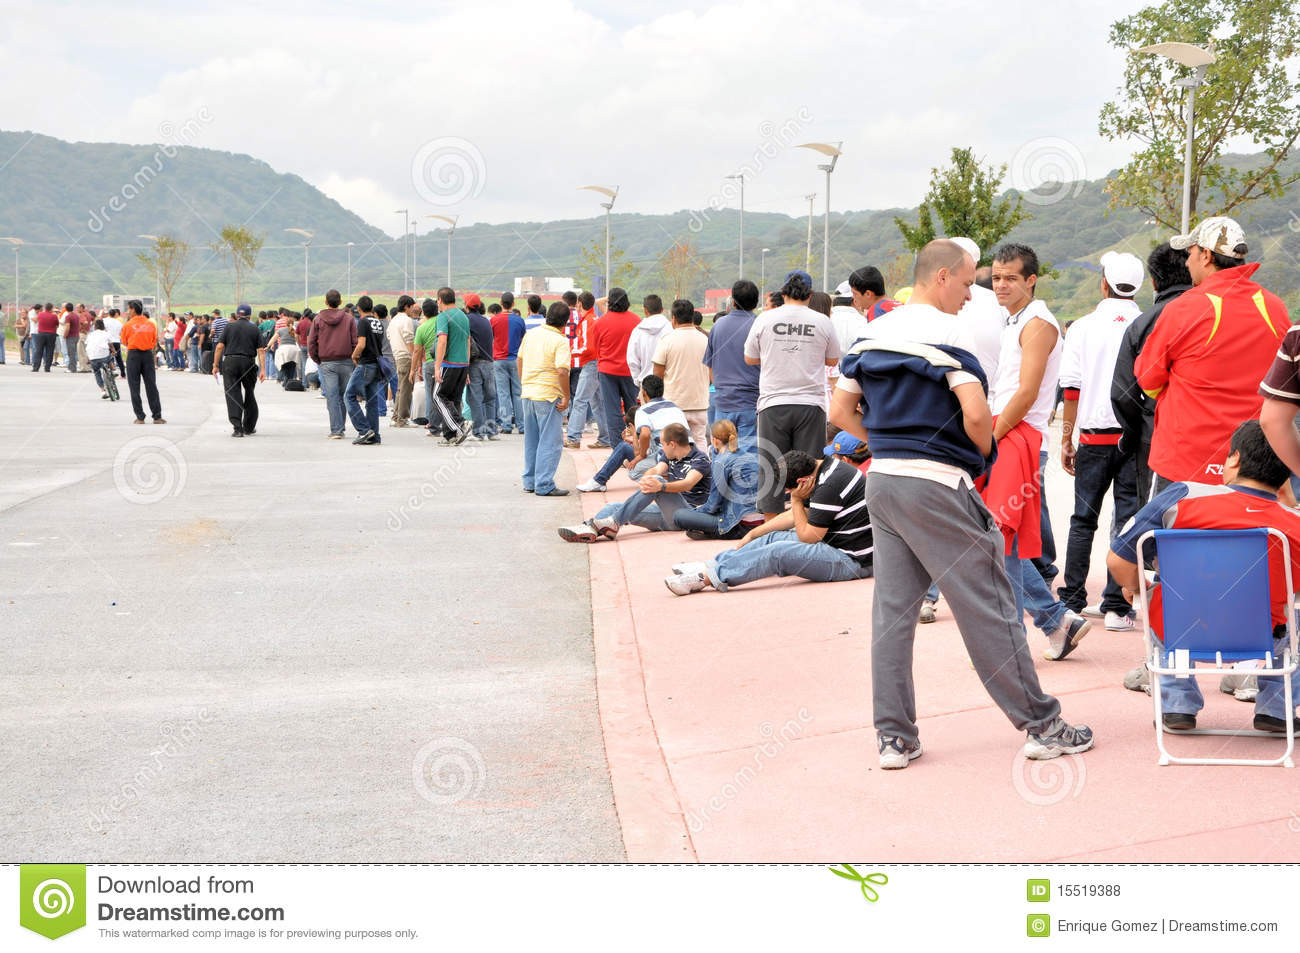 People In Line To Buy Tickets For A Soccer Game At Guadalajara Mexico